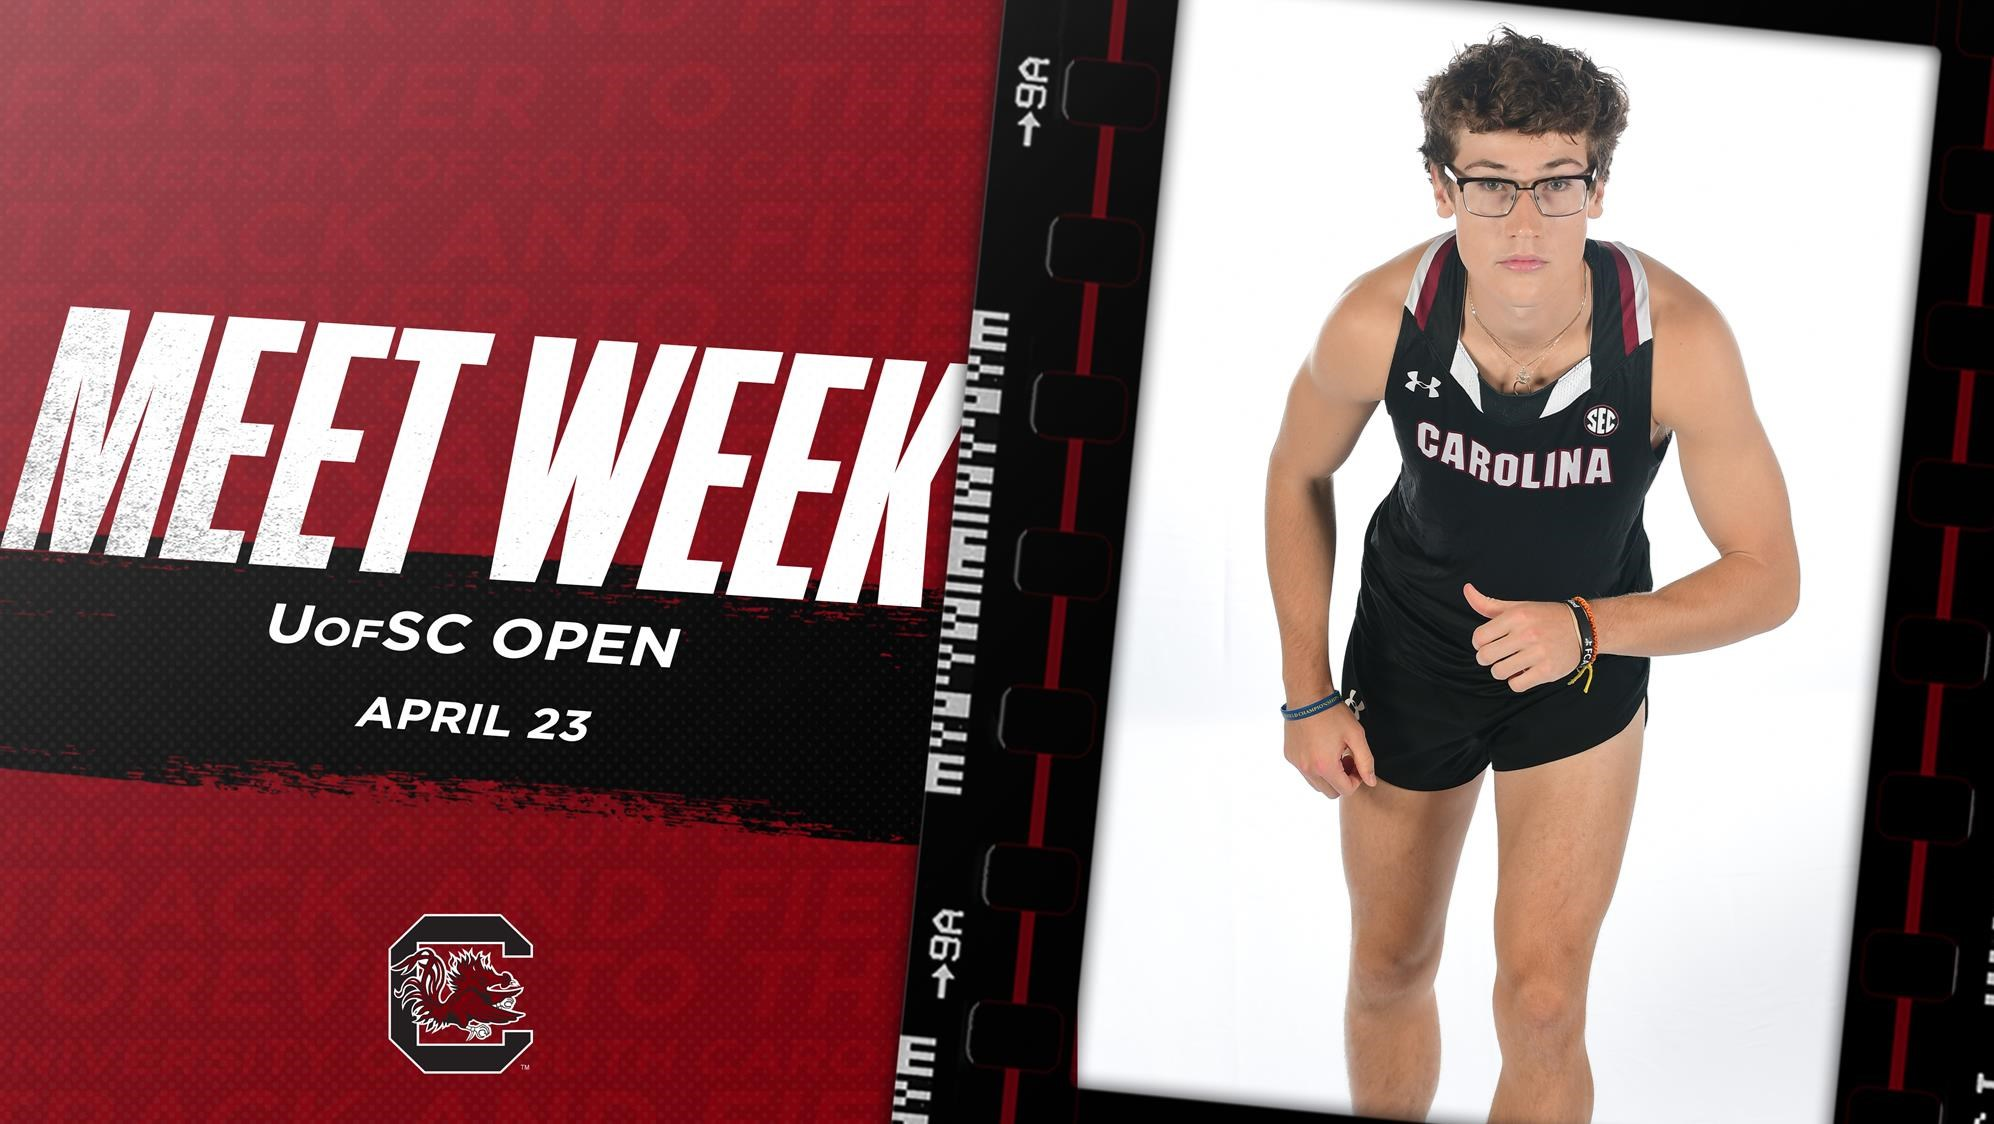 Gamecock Track and Field Hosts Senior Day at UofSC Open